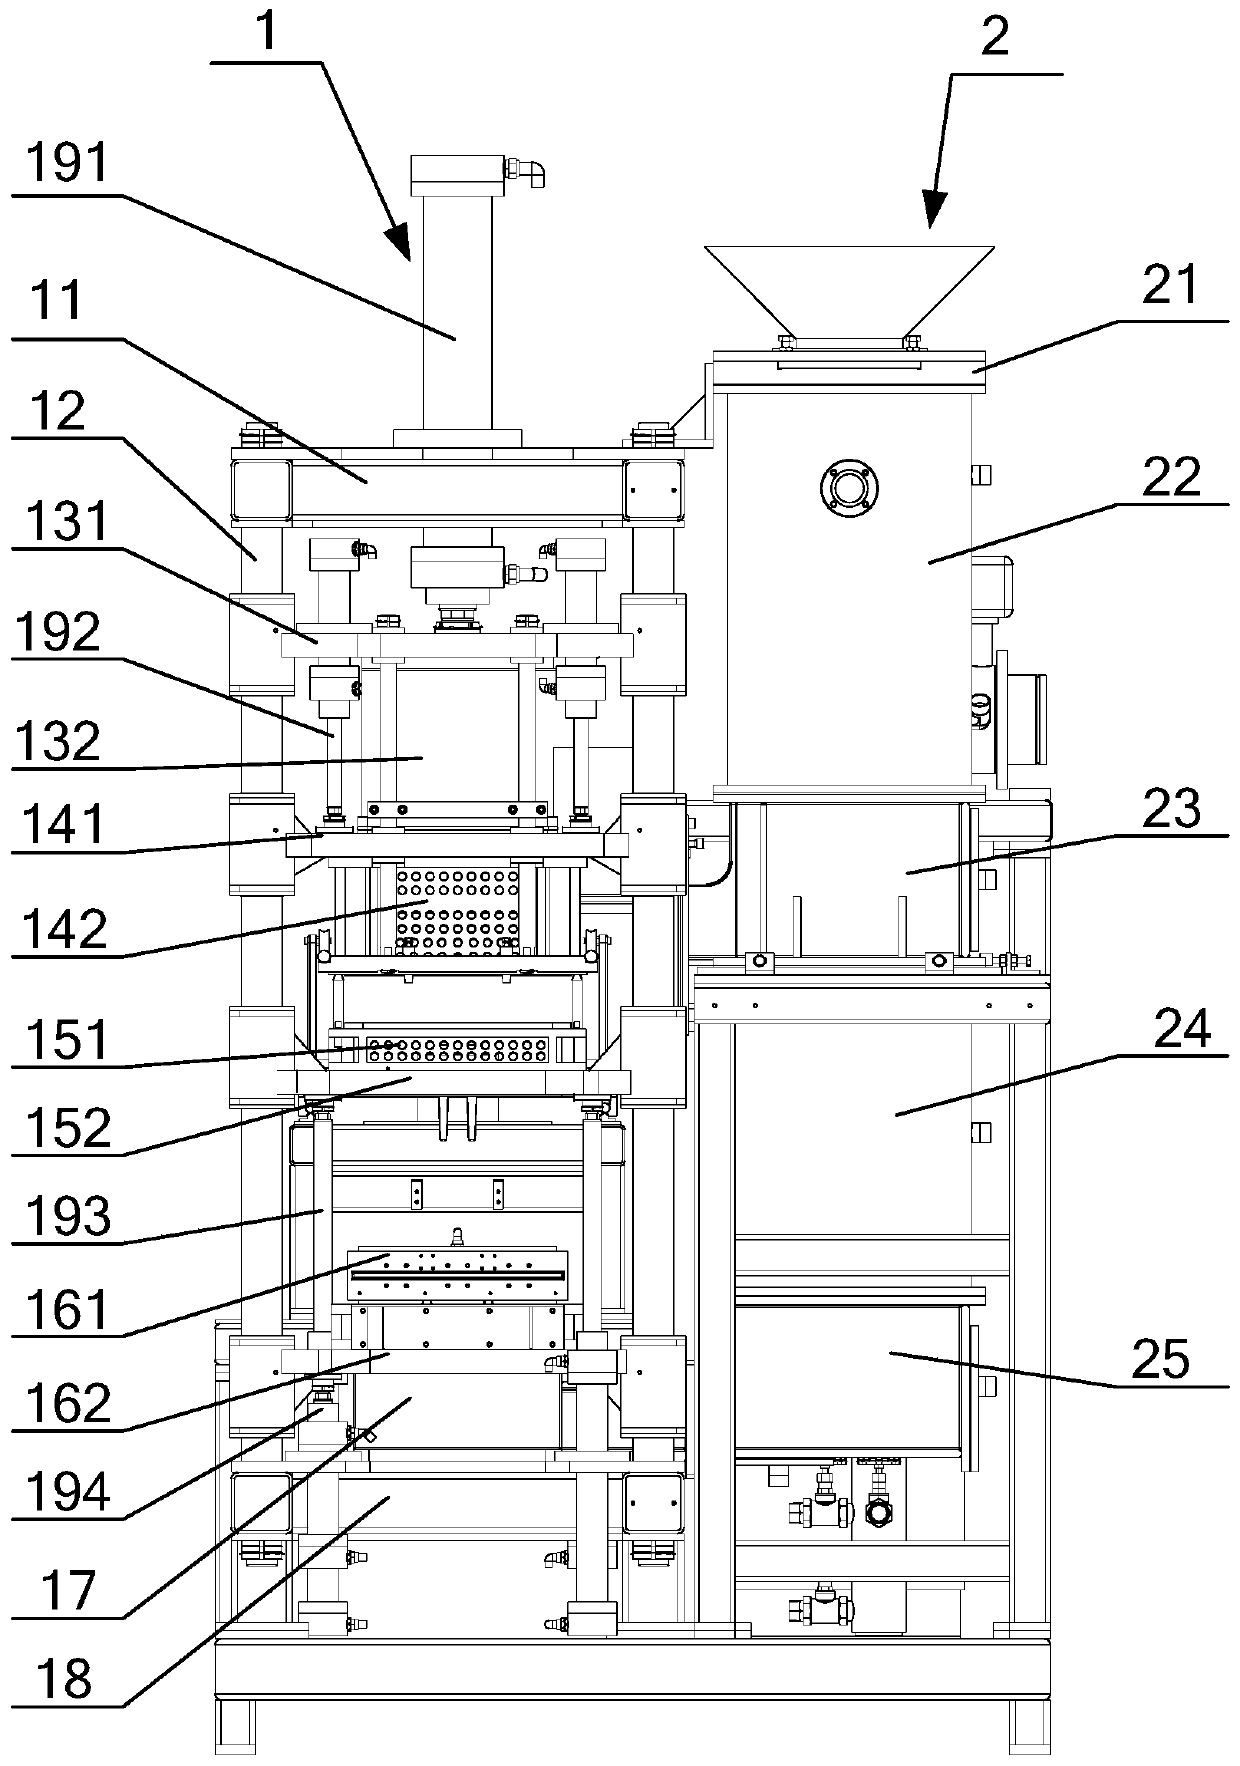 Up-down opposite jetting removable flask molding machine